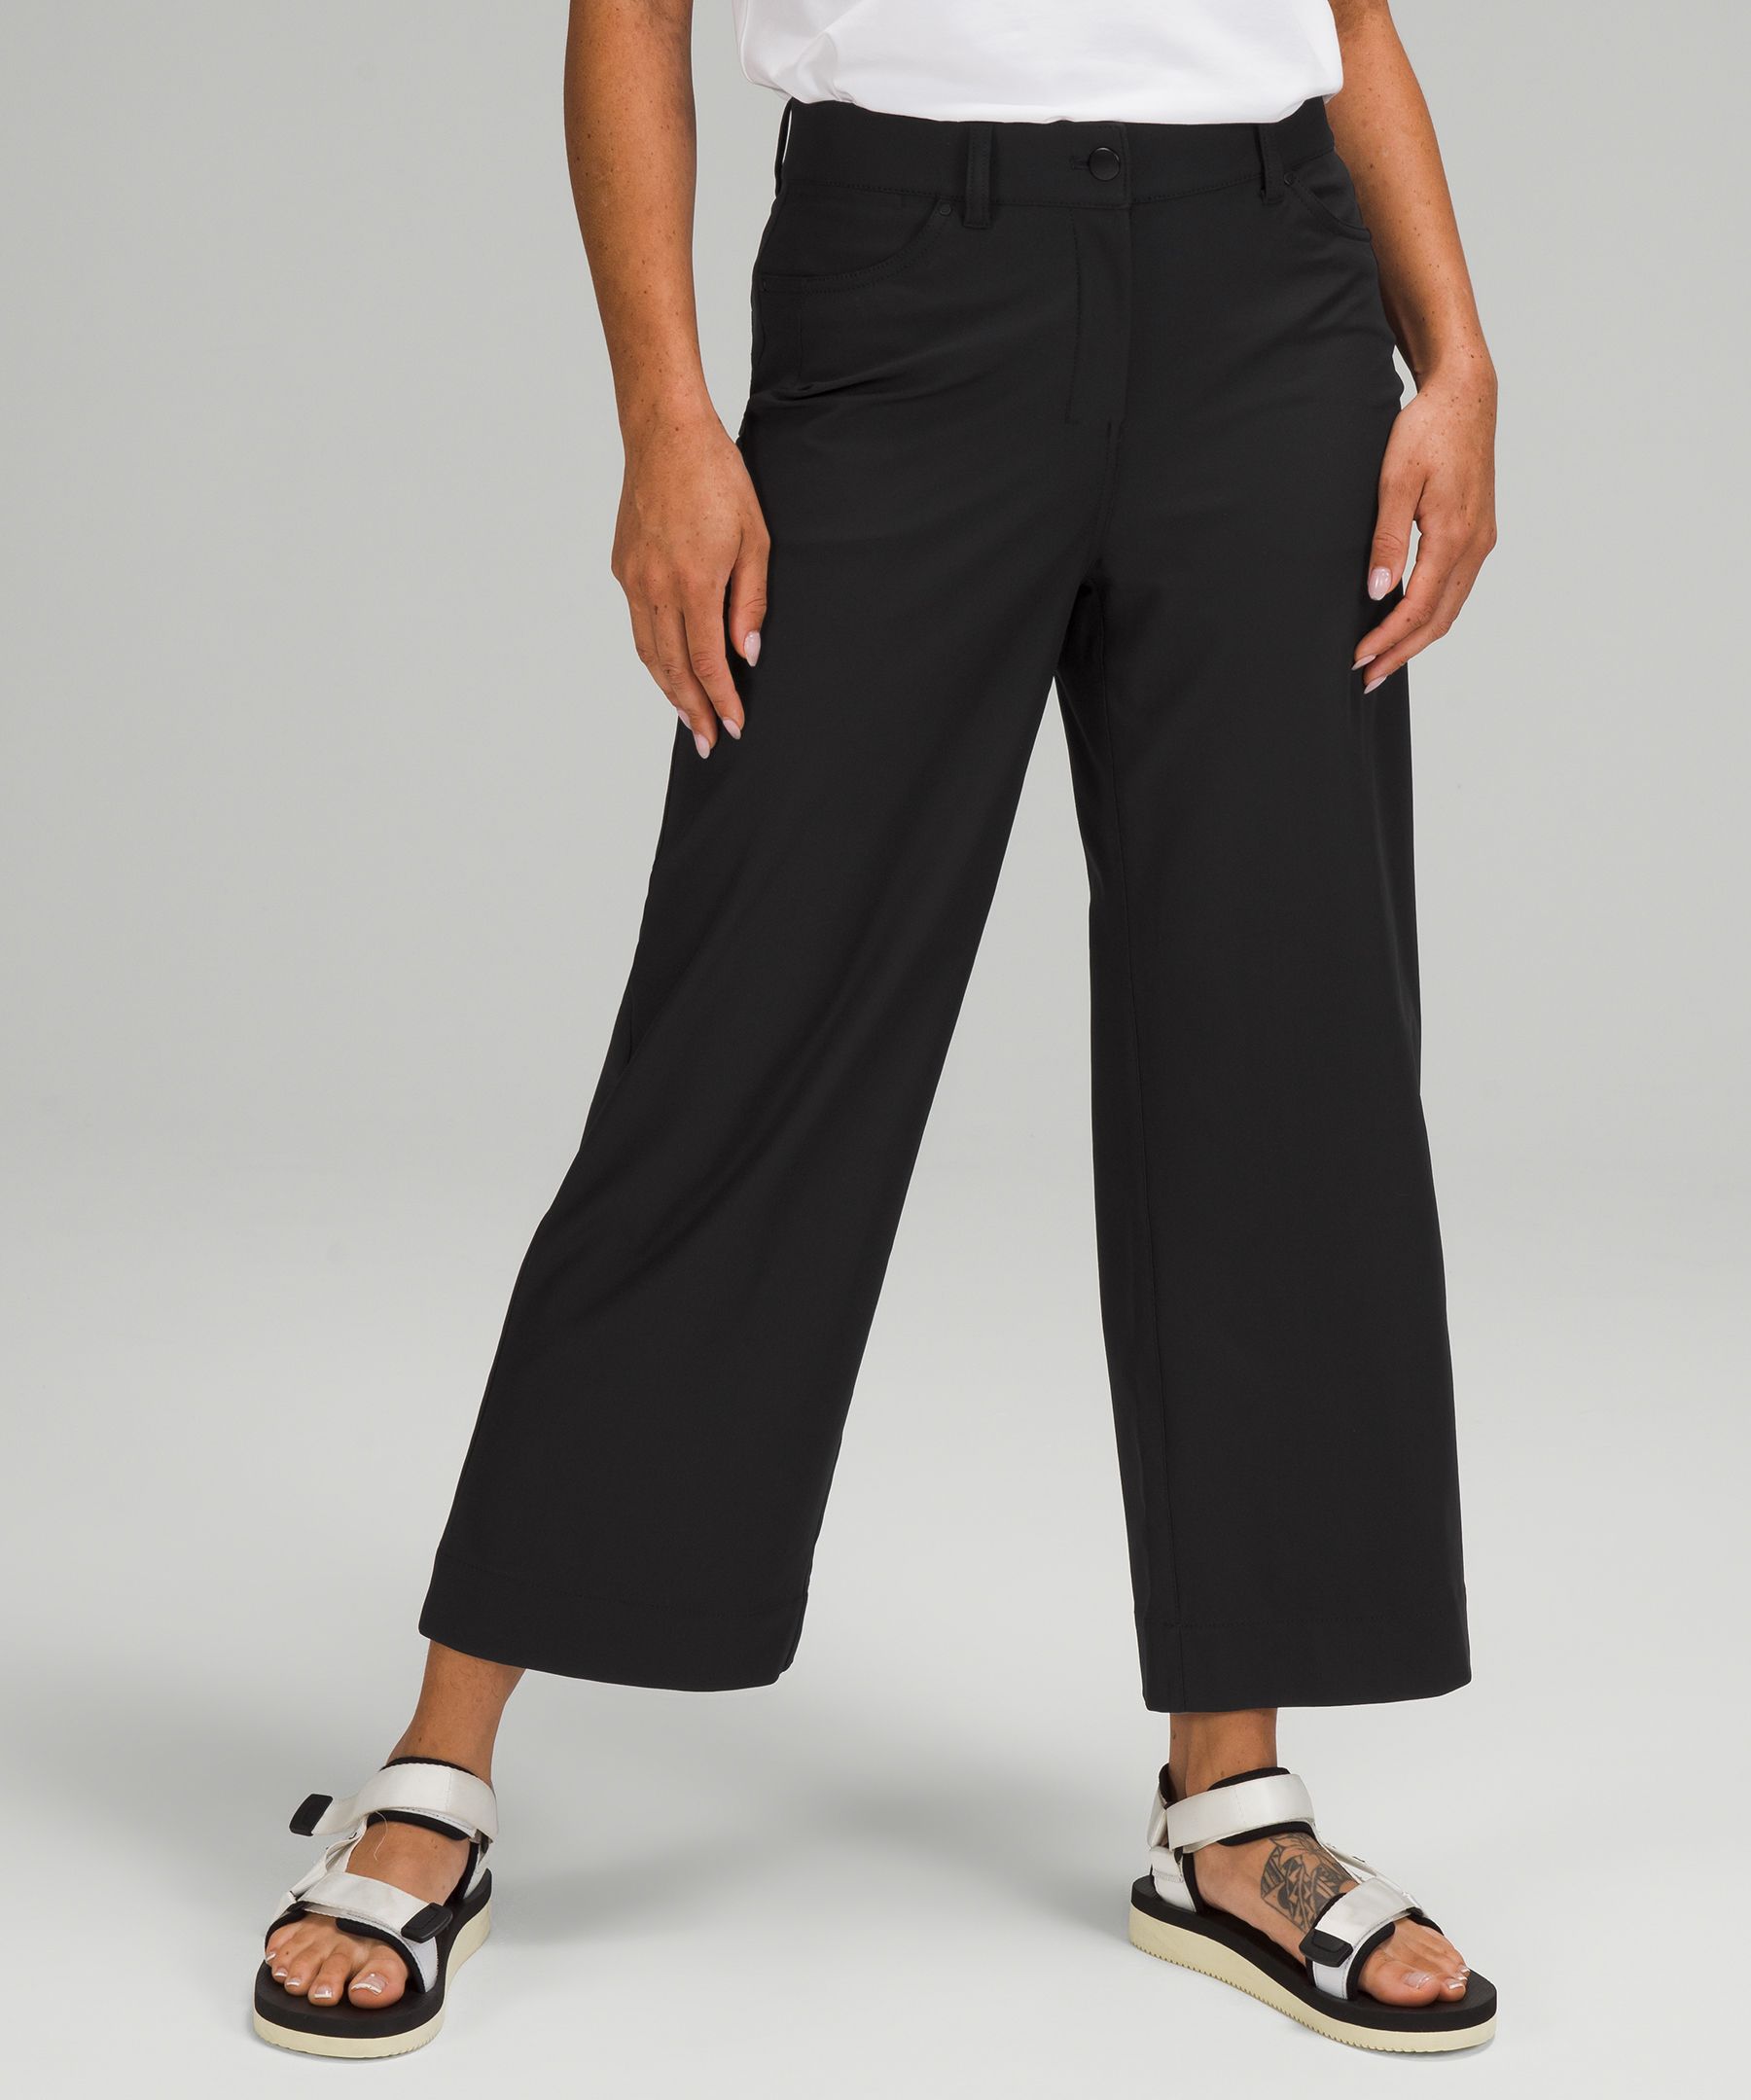 Cropped Pants For Women Office Women Pants With Pockets Wide Leg